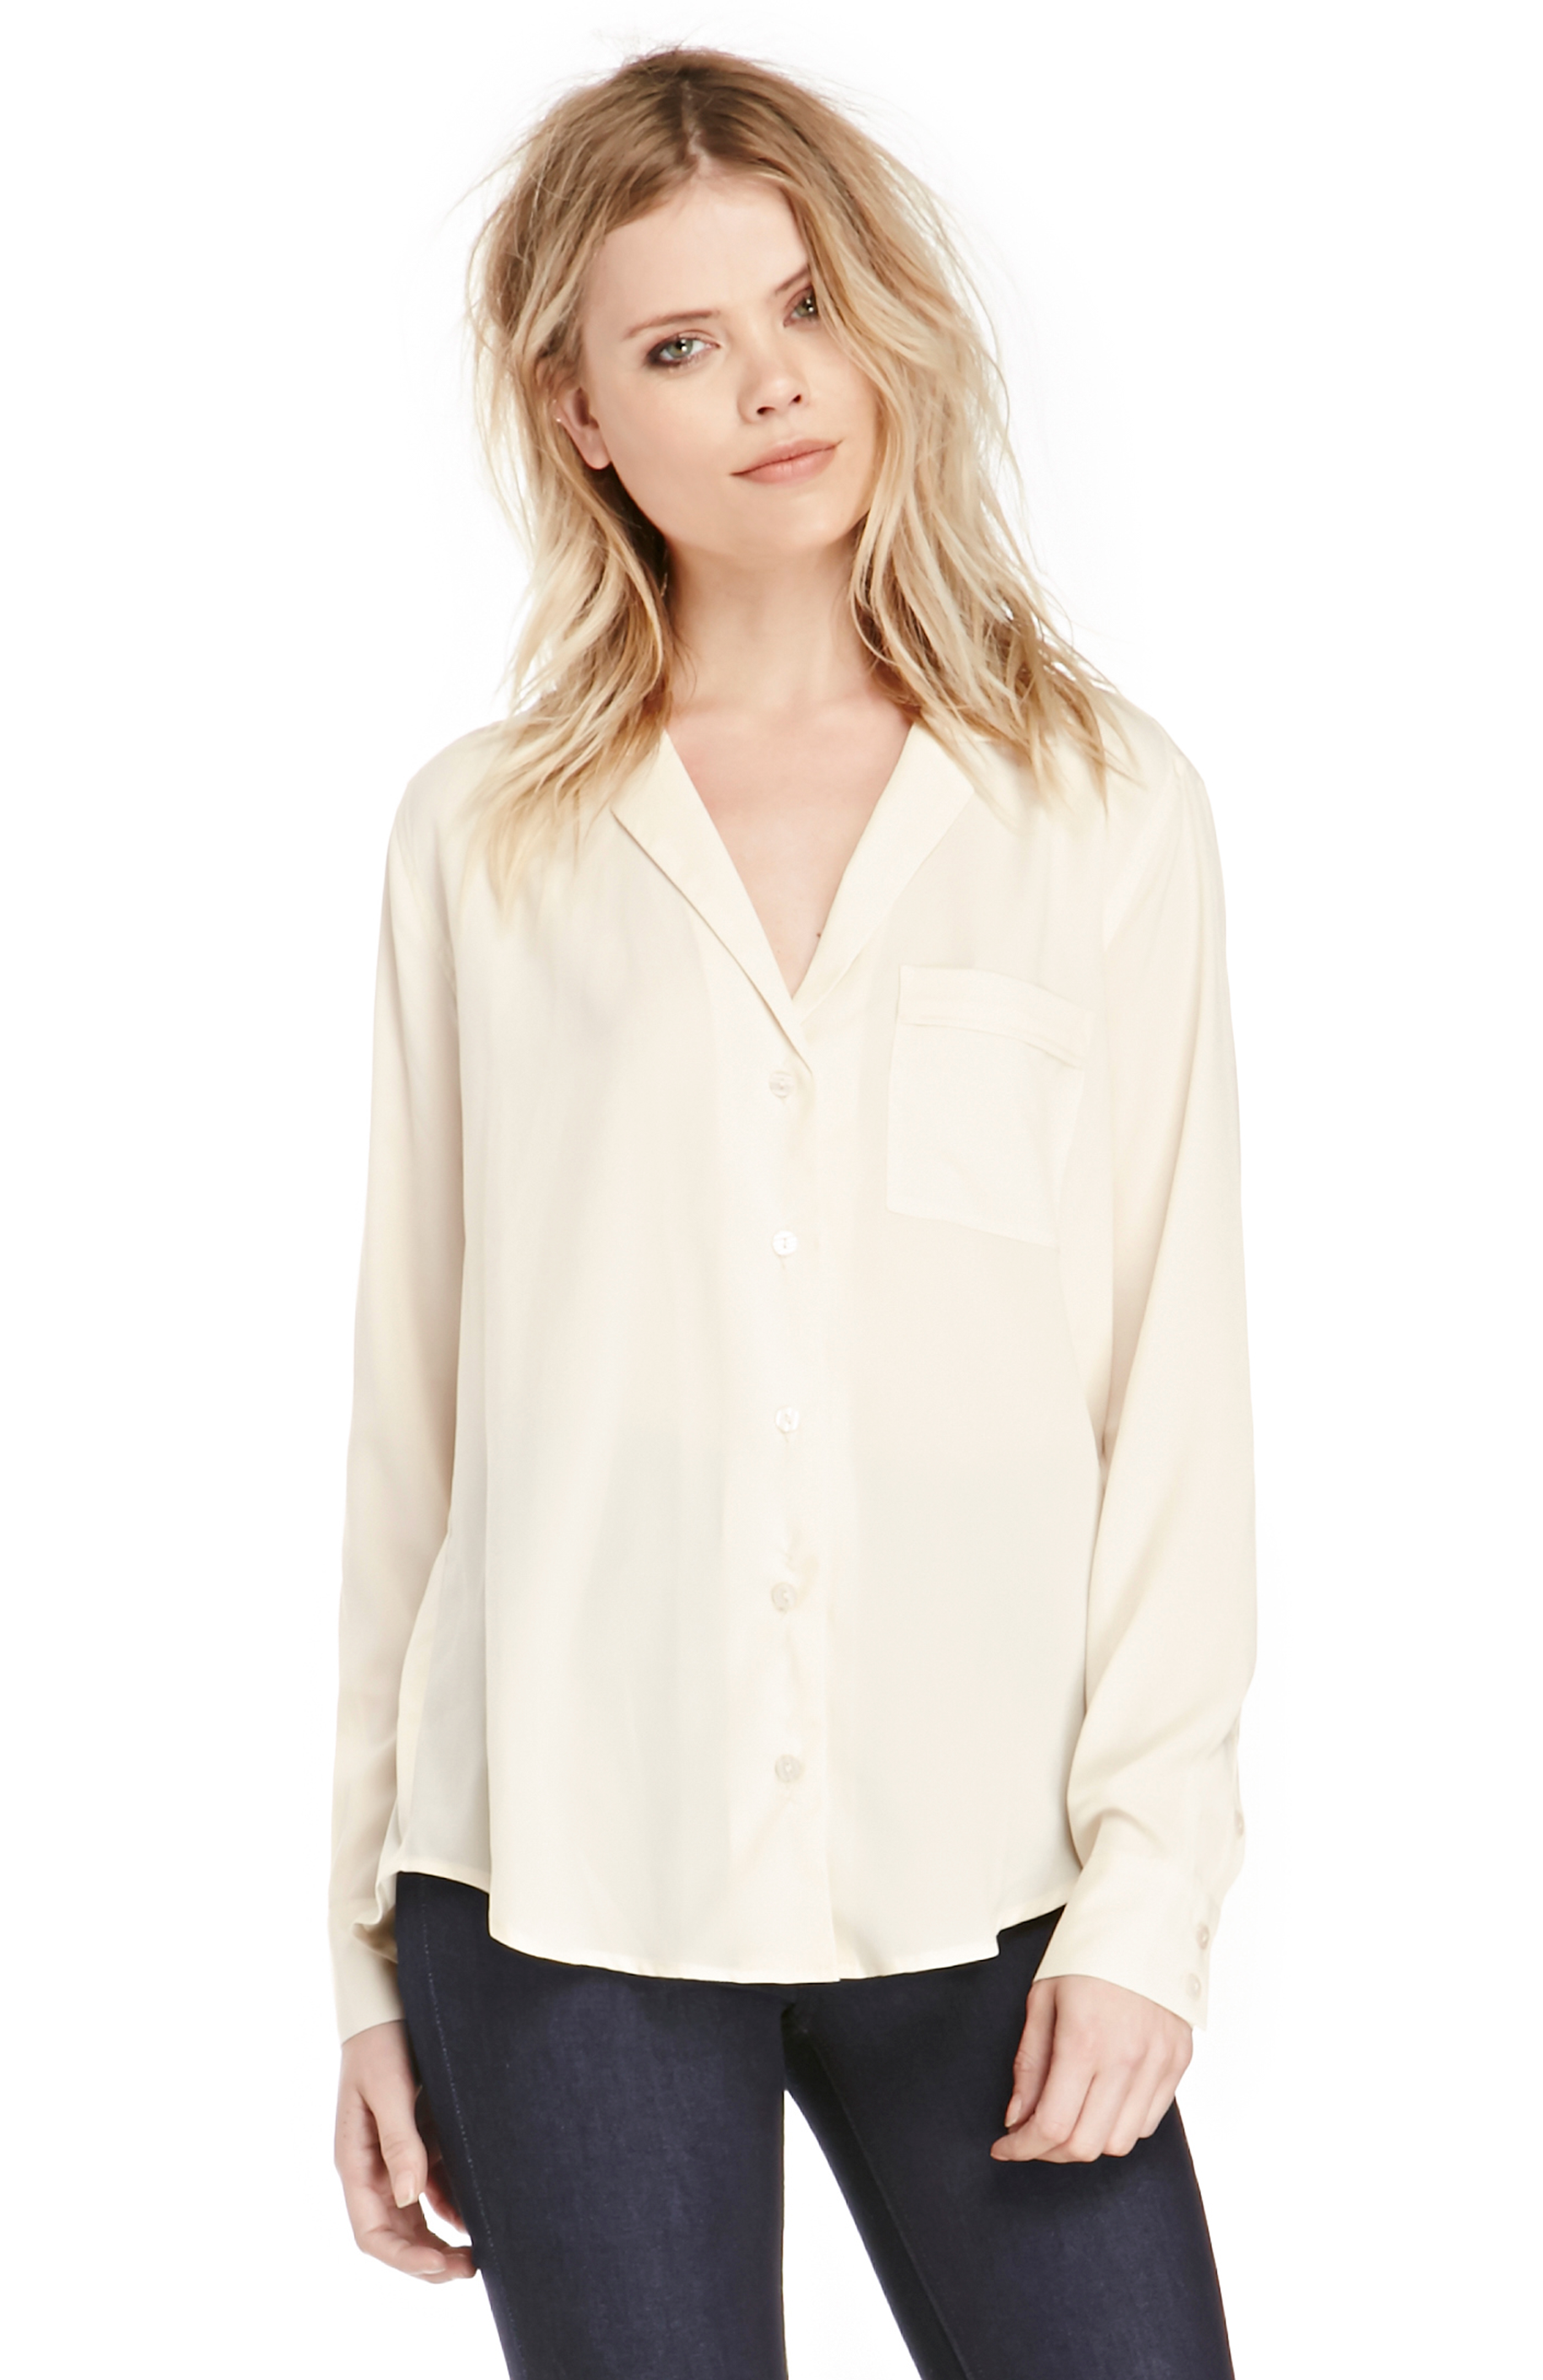 Bed Ready Blouse in Cream XS | DAILYLOOK